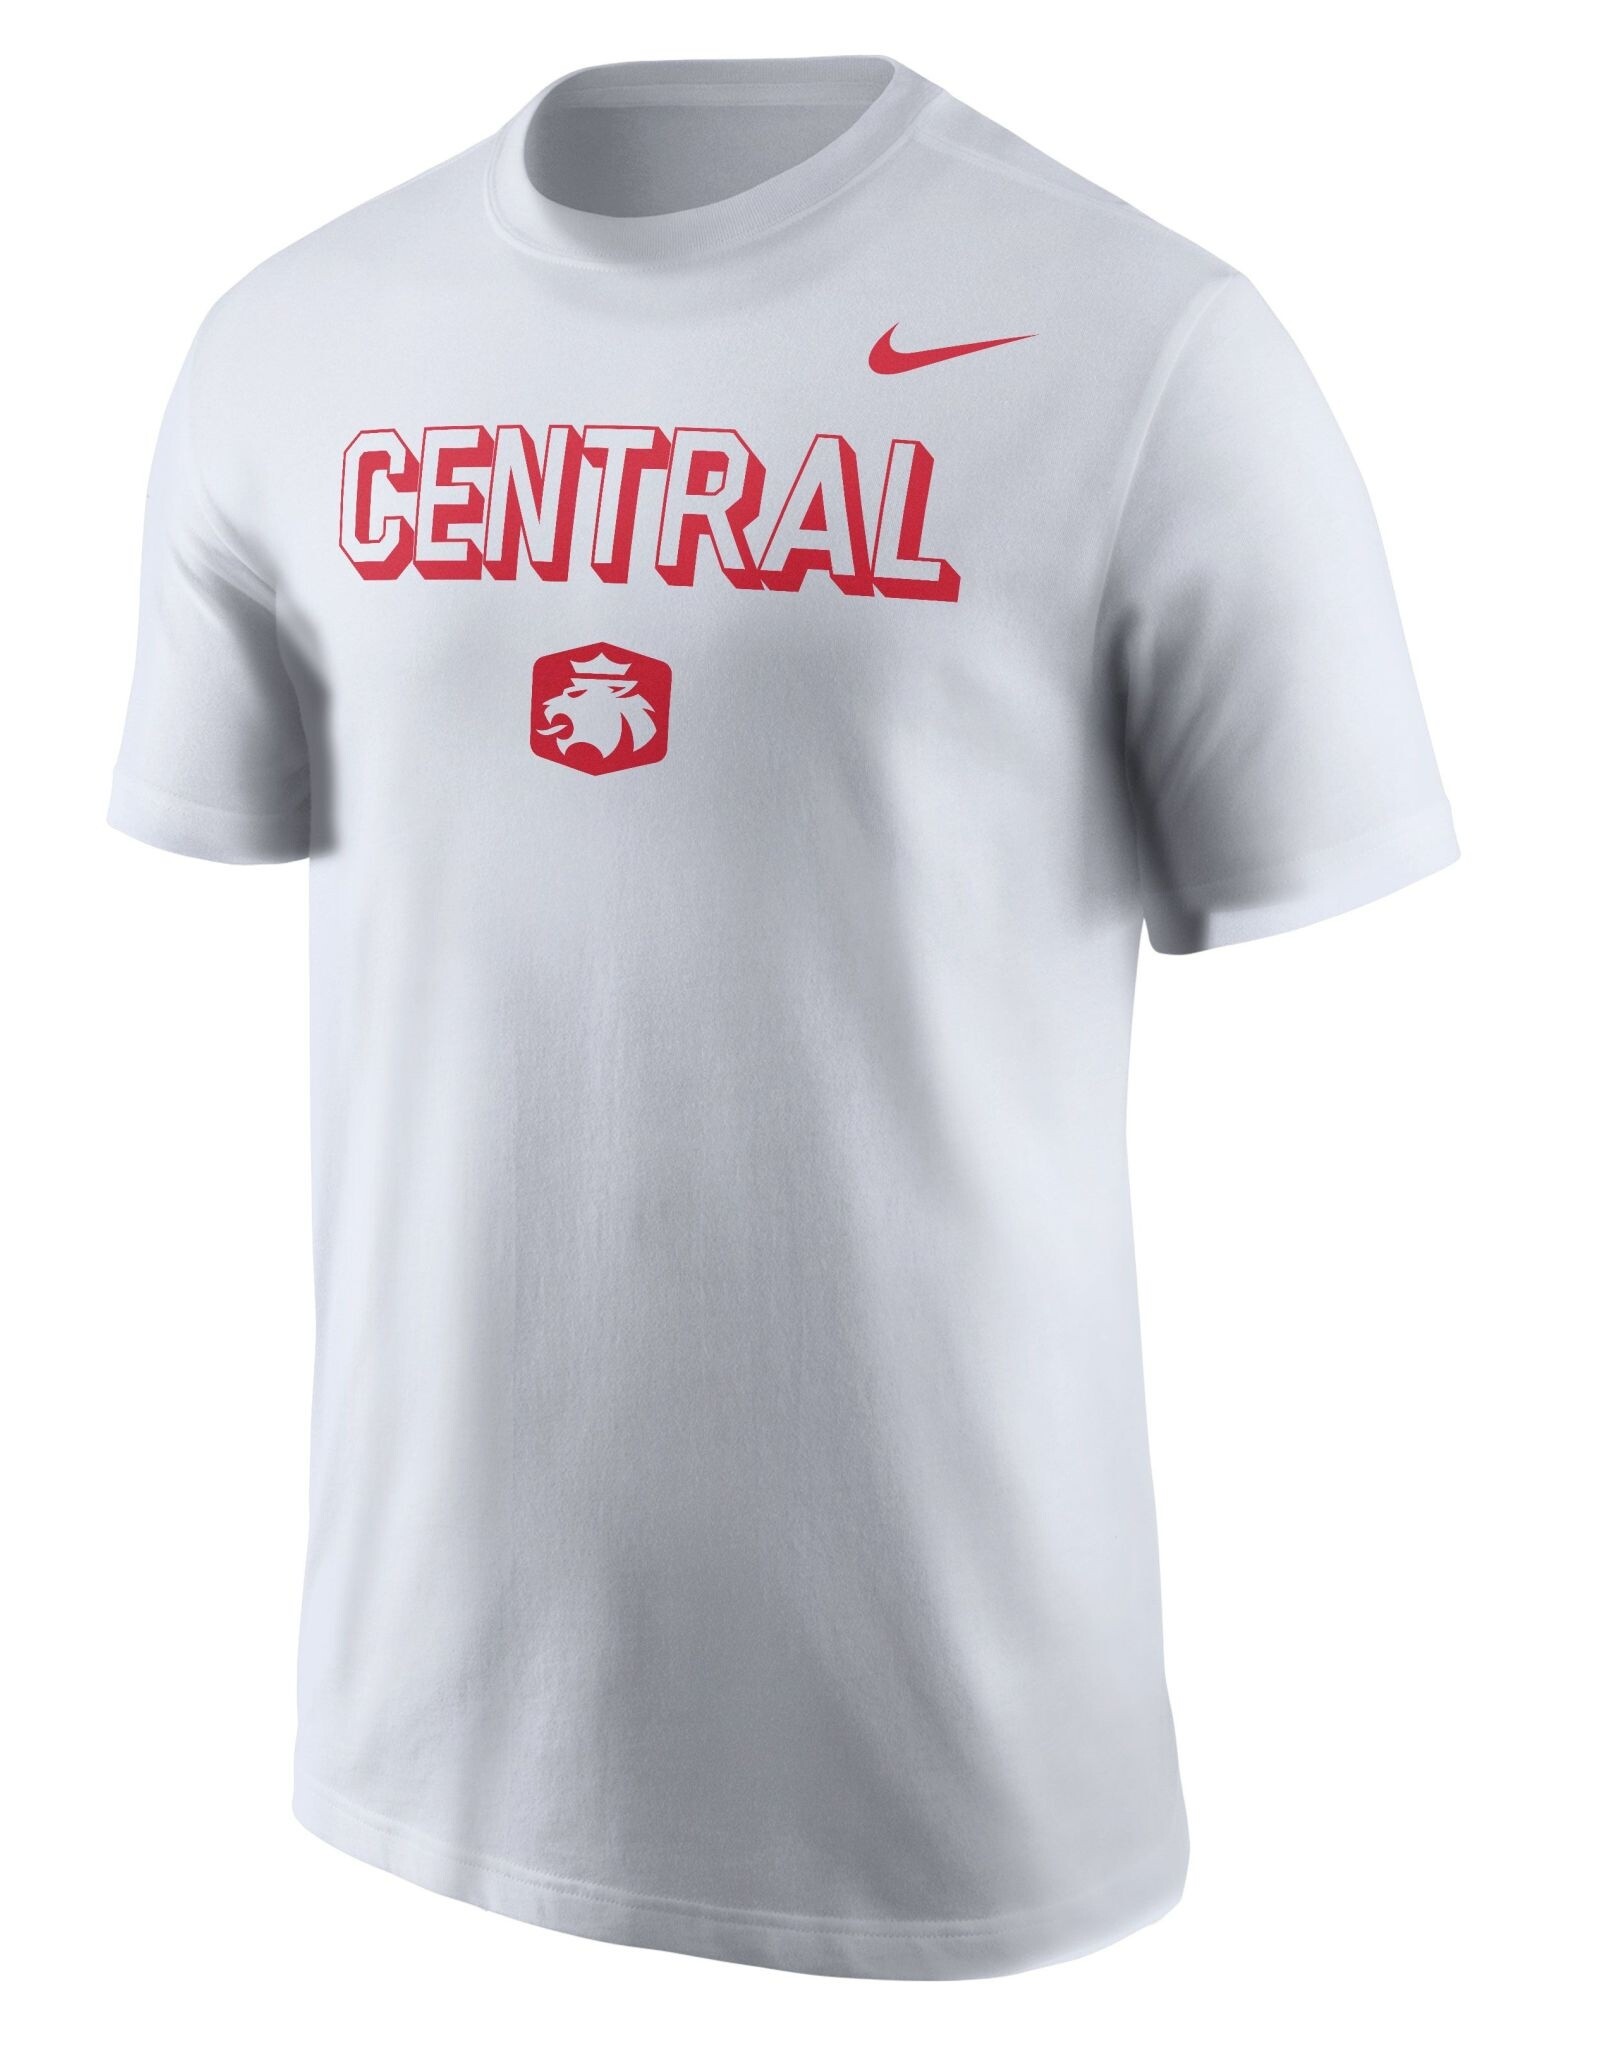 Nike Nike Core Tee Central over Lion Logo White